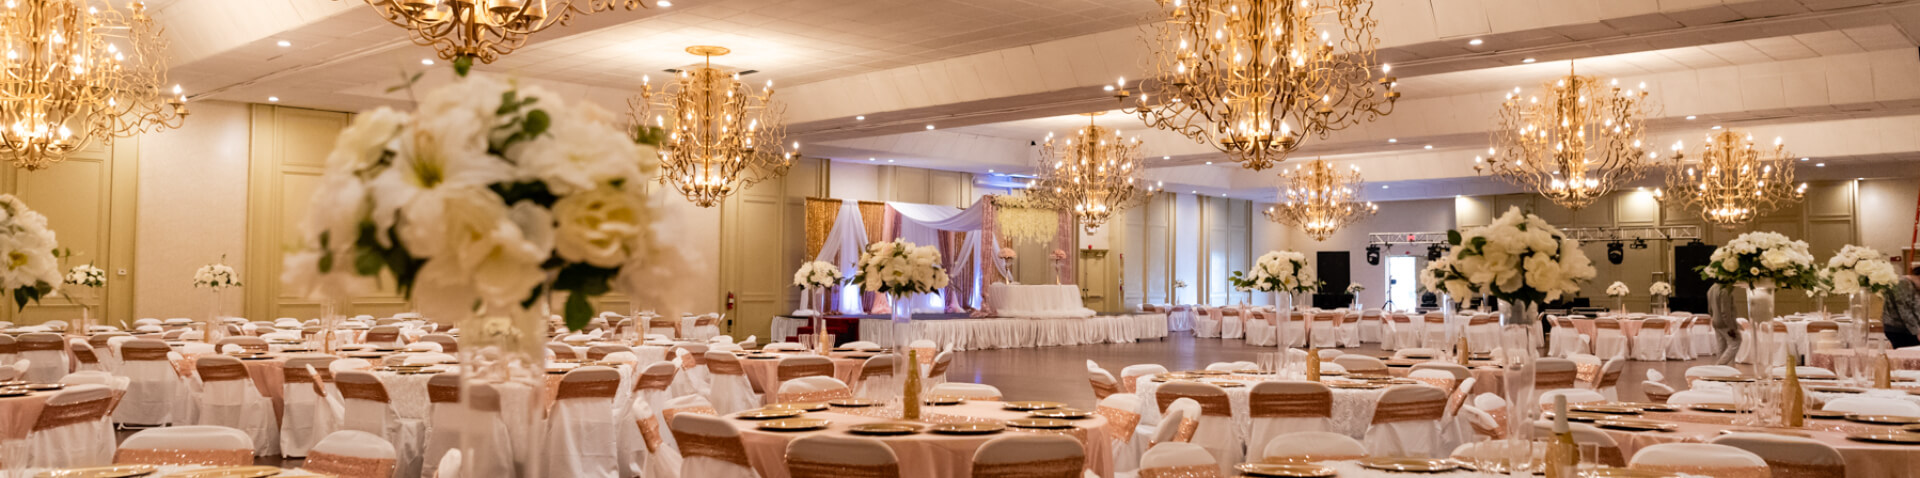 decorated room with tables and chandeliers